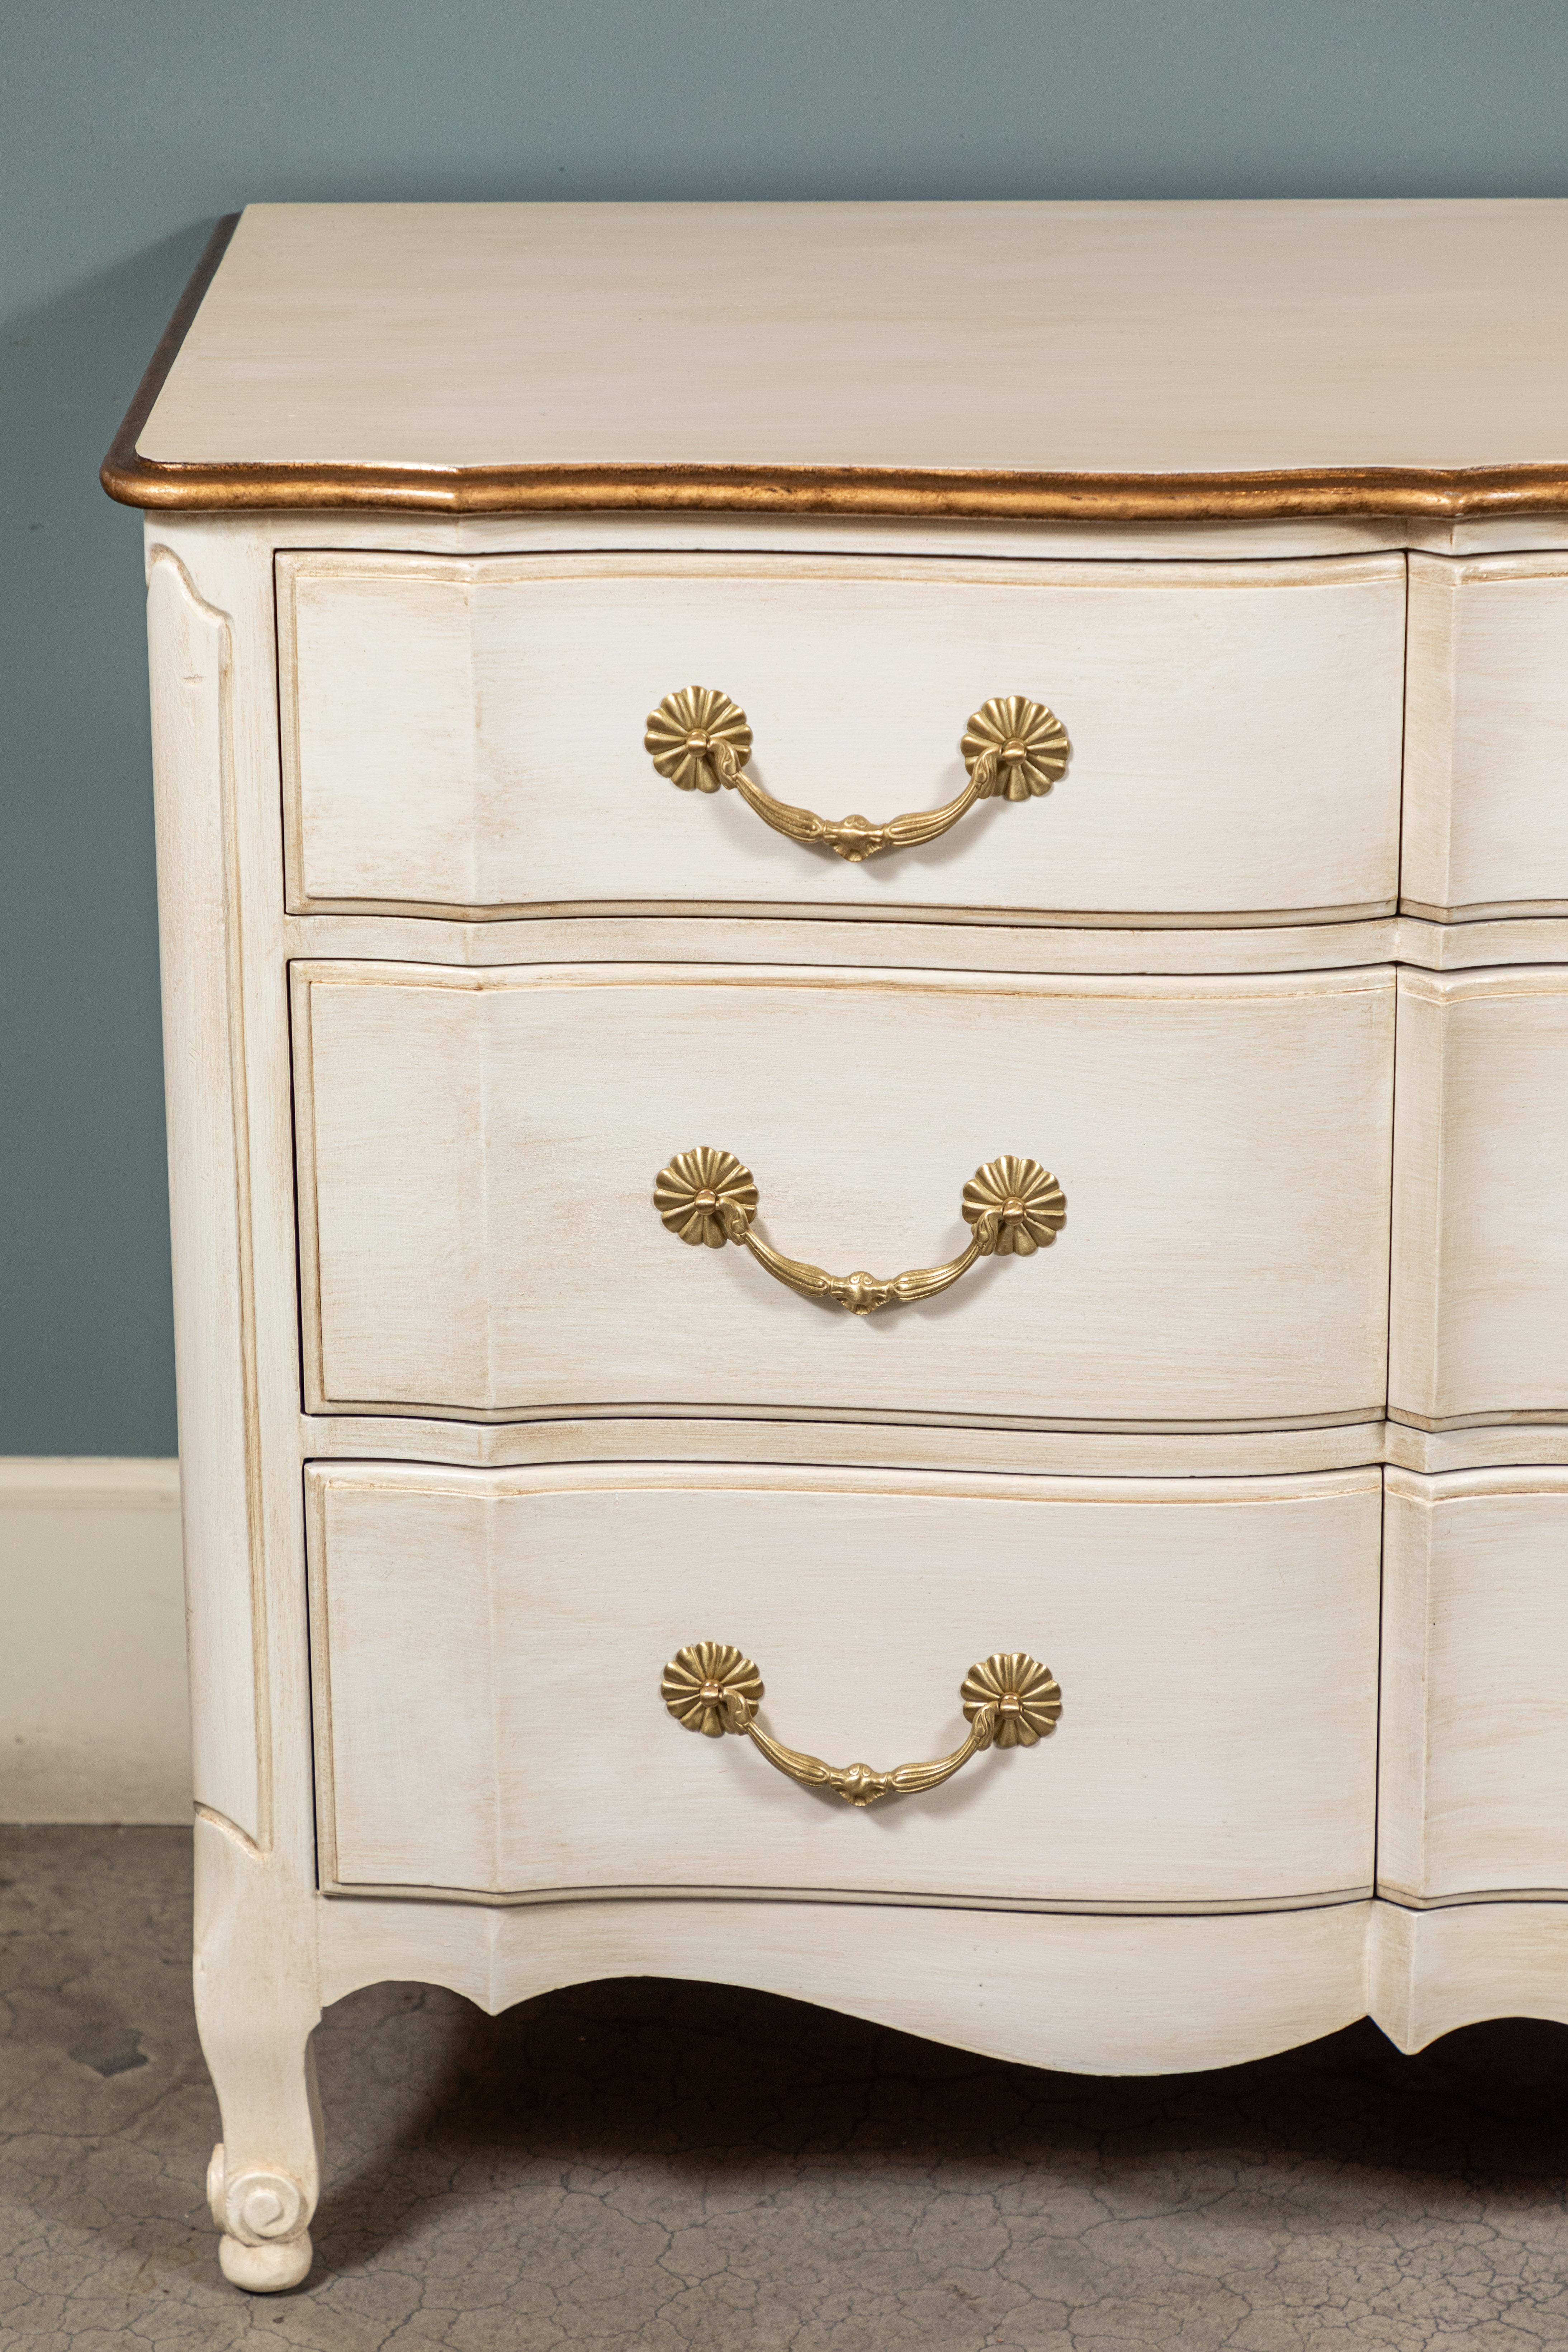 Vintage French Provincial style walnut dresser with 9 drawers that has been newly refinished and hand-painted in a creamy white with gold trim detail.

The brass hardware has been polished in a satin finish.